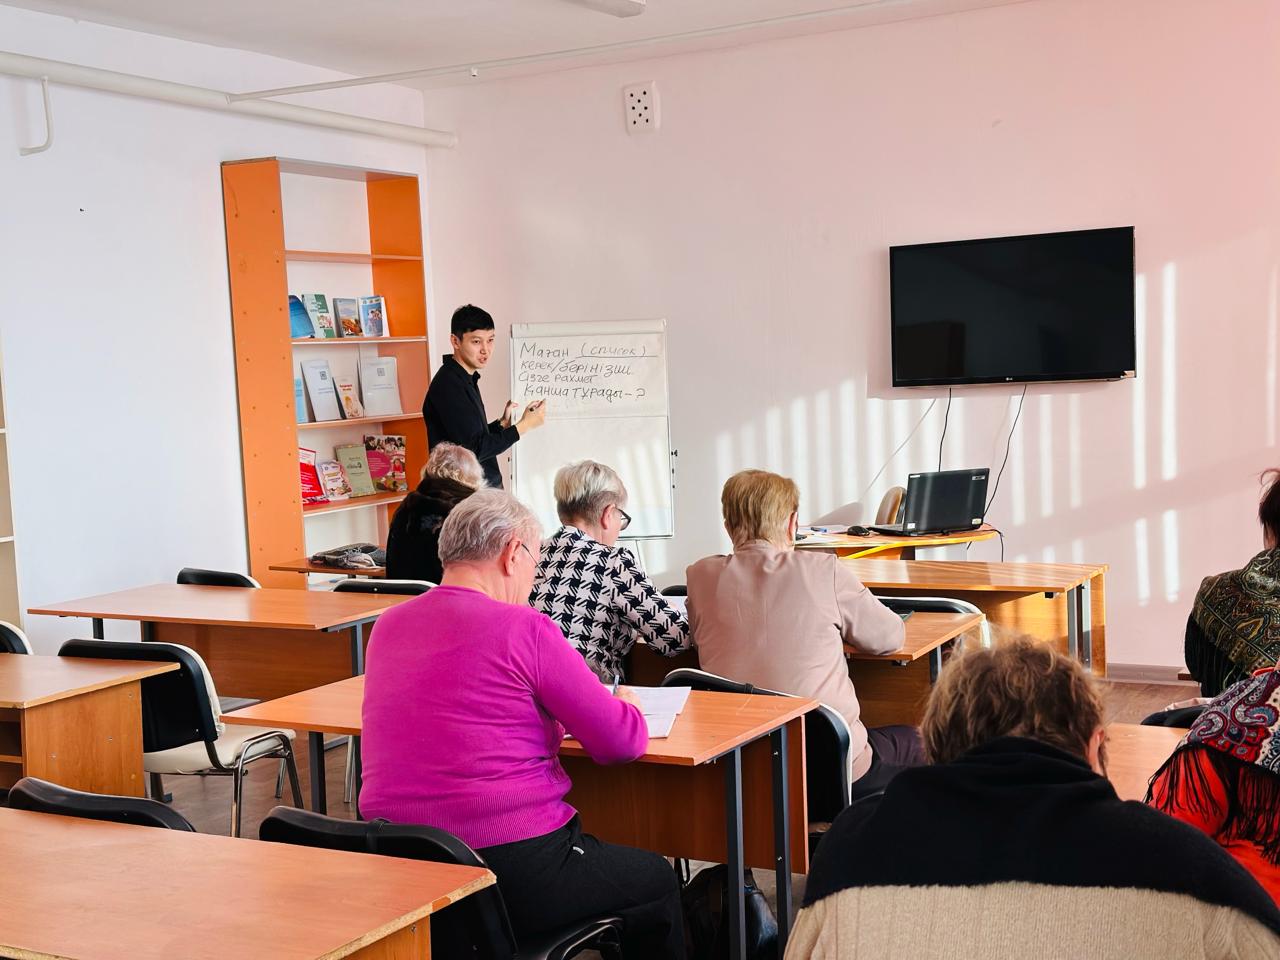 THE KAZAKH LANGUAGE COURSE FOR STUDENTS OF THE "SILVER UNIVERSITY" HAS BEGUN